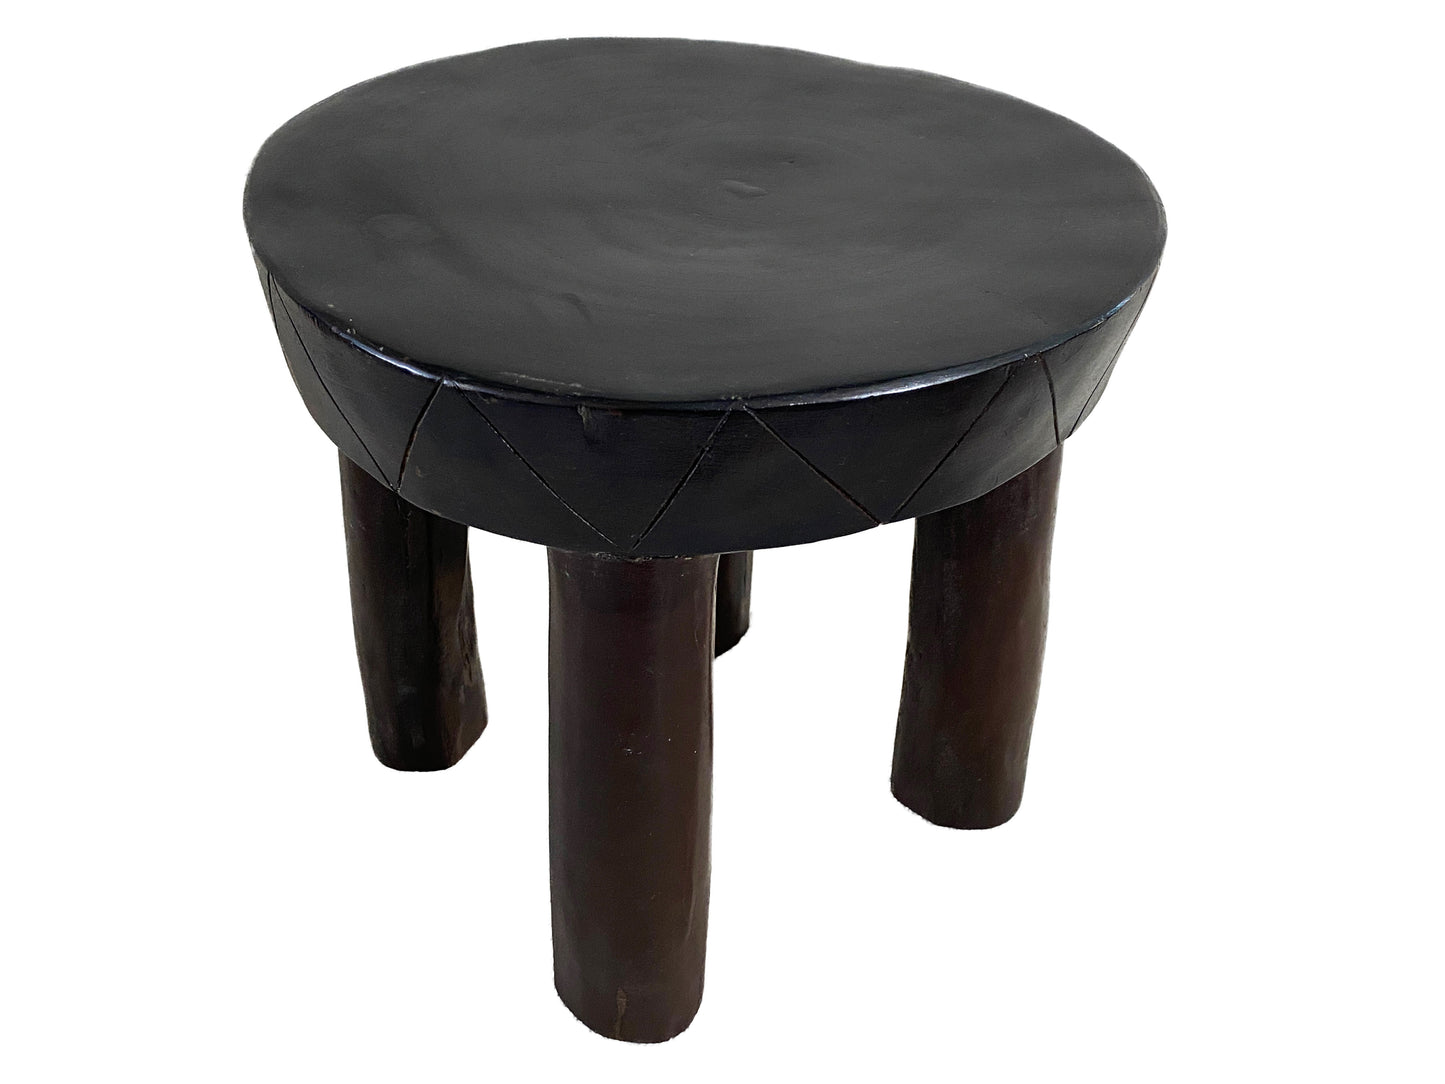 # 4386/26 African Old Carved Wood Milk Stool Hehe Gogo People Tanzania 10" H